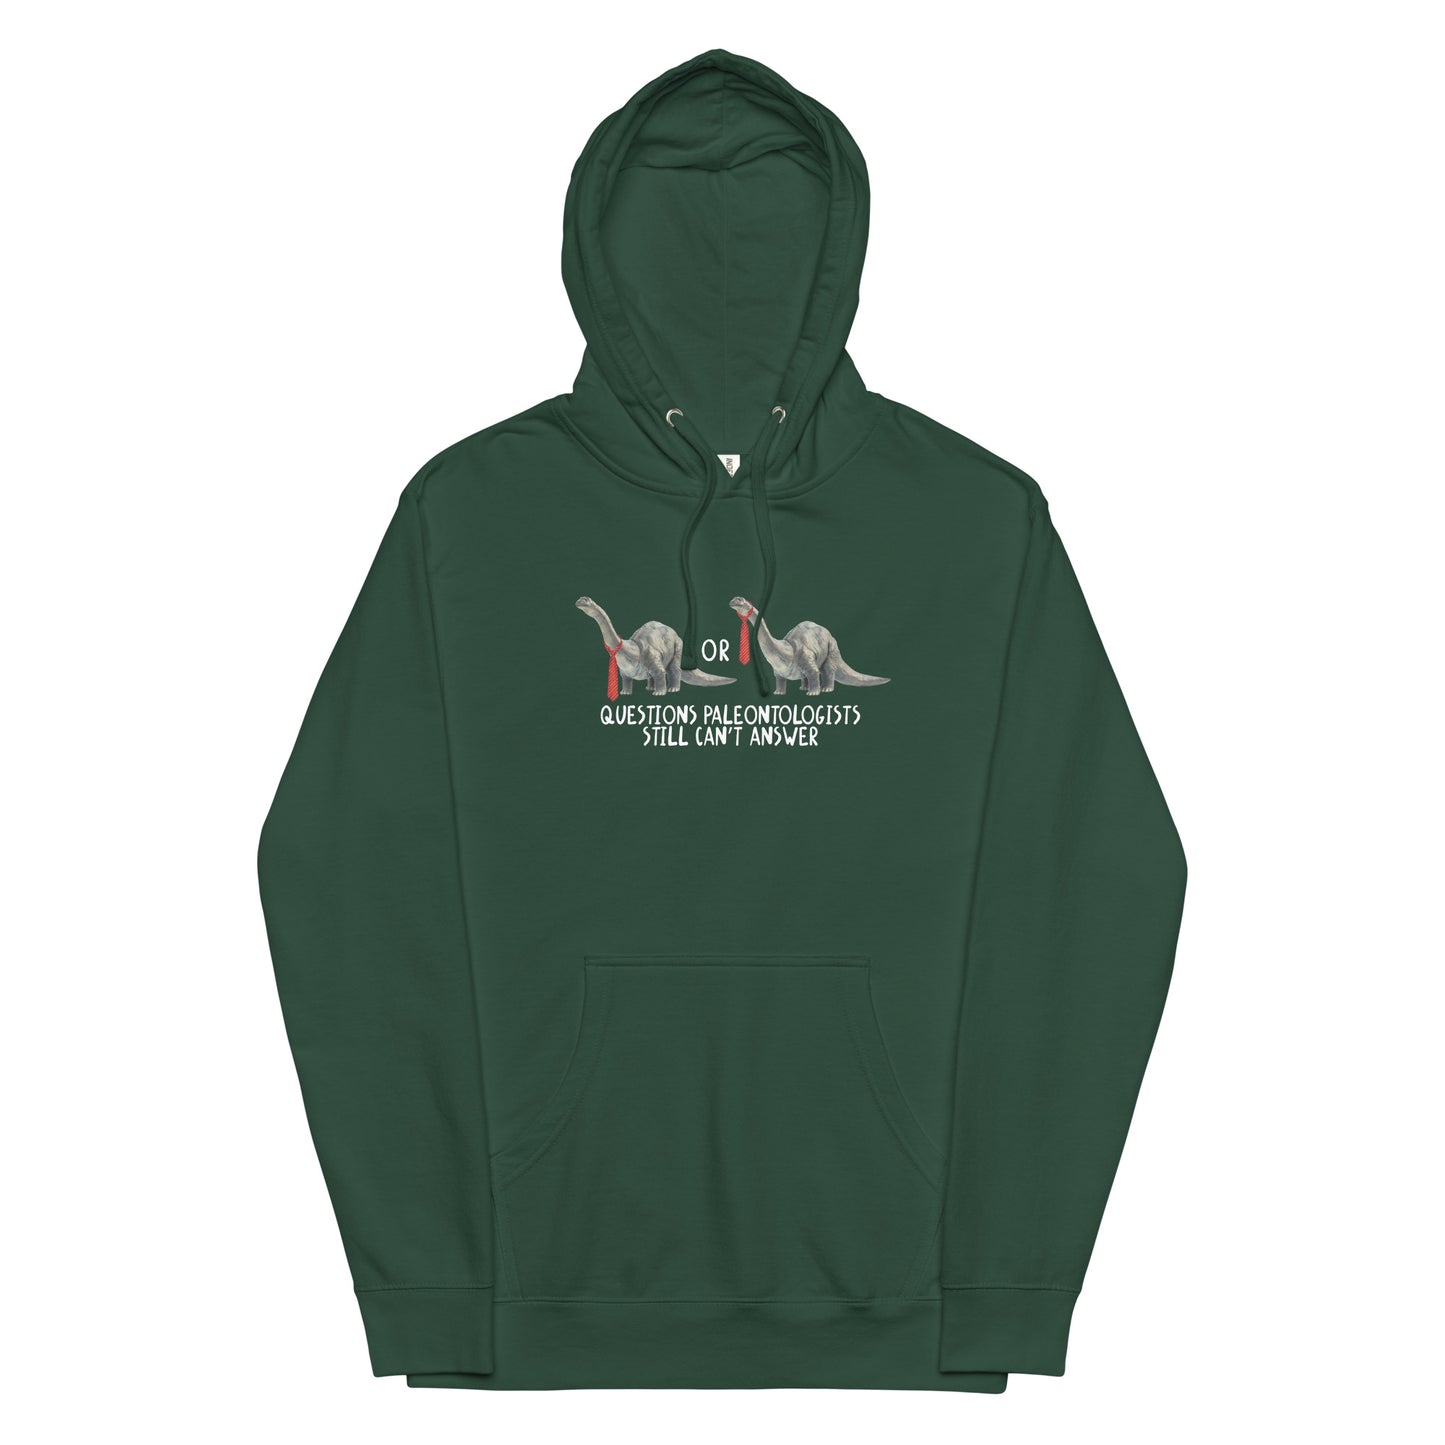 Questions Paleontologists Still Can’t Answer Unisex hoodie